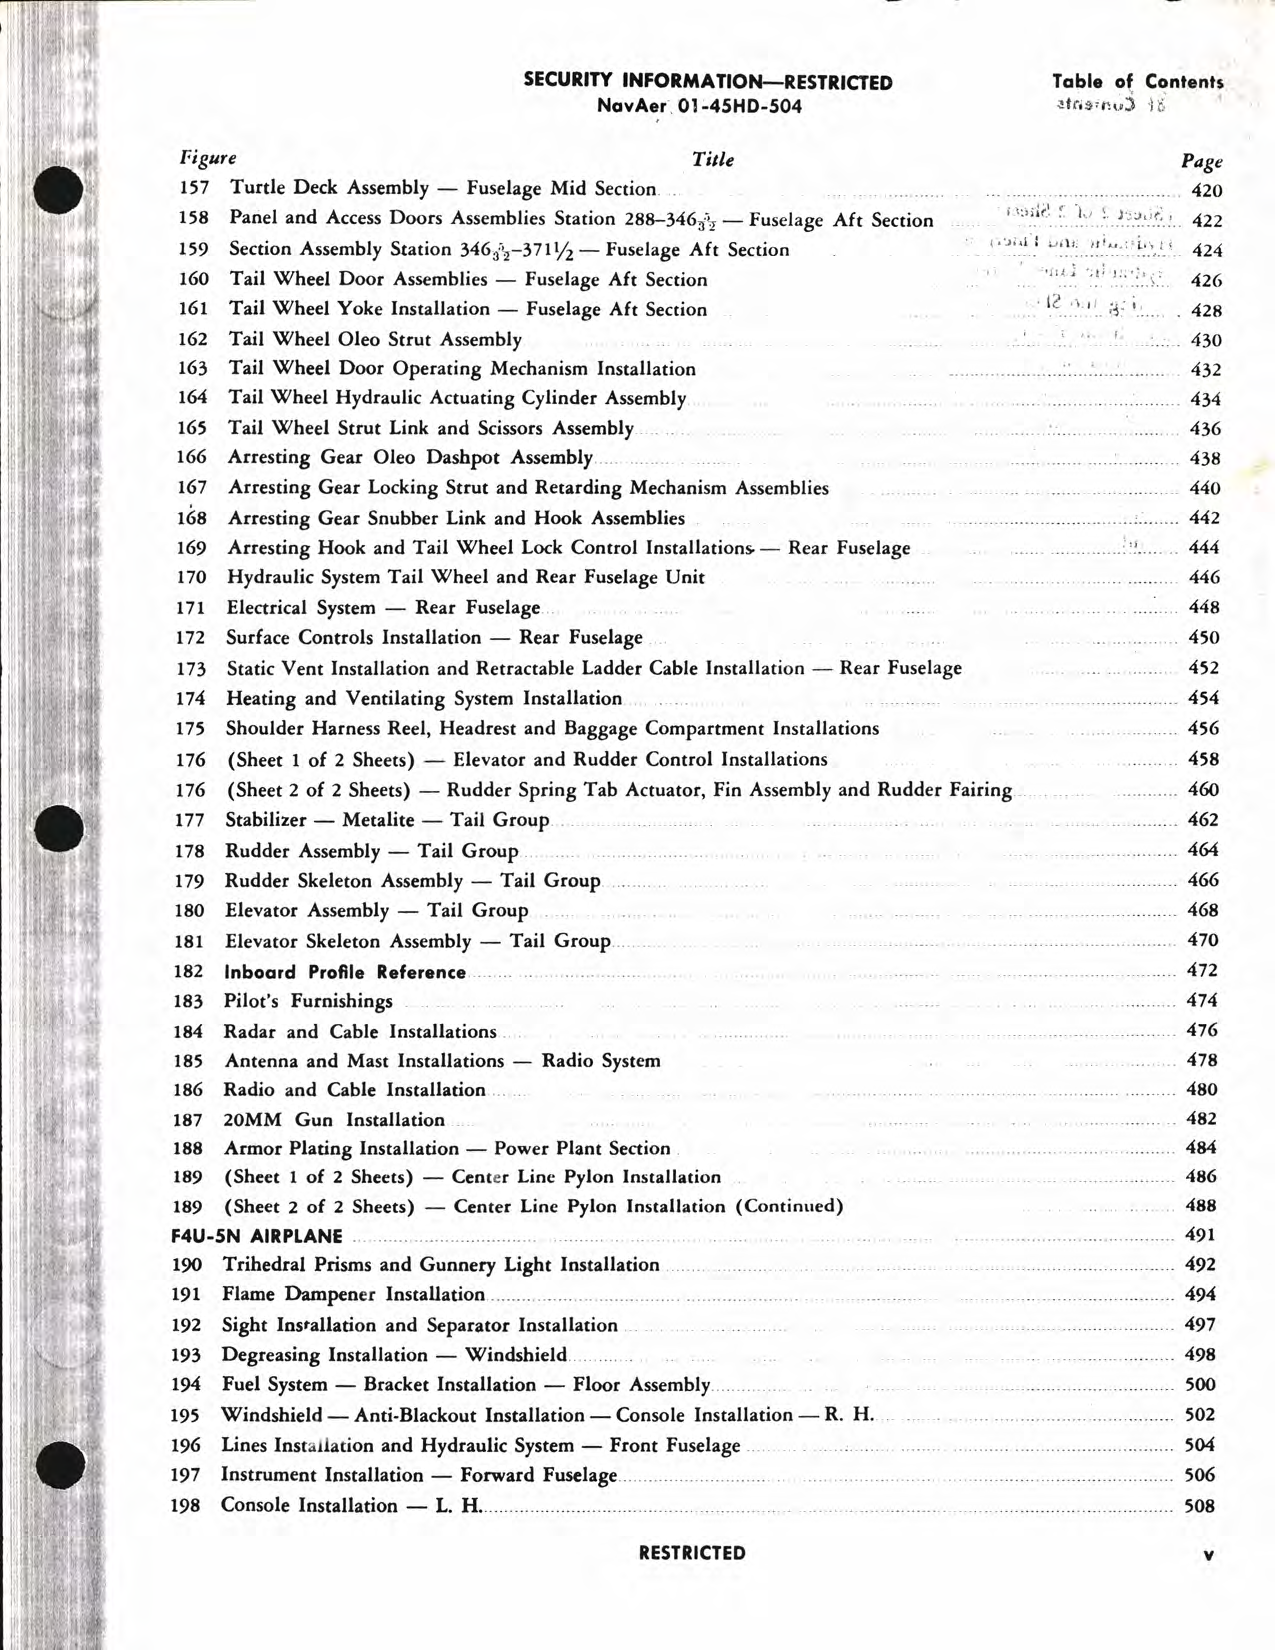 Sample page 7 from AirCorps Library document: Illustrated Maintenance Parts List for F4U-5, -5N, -5NL and -5P Aircraft